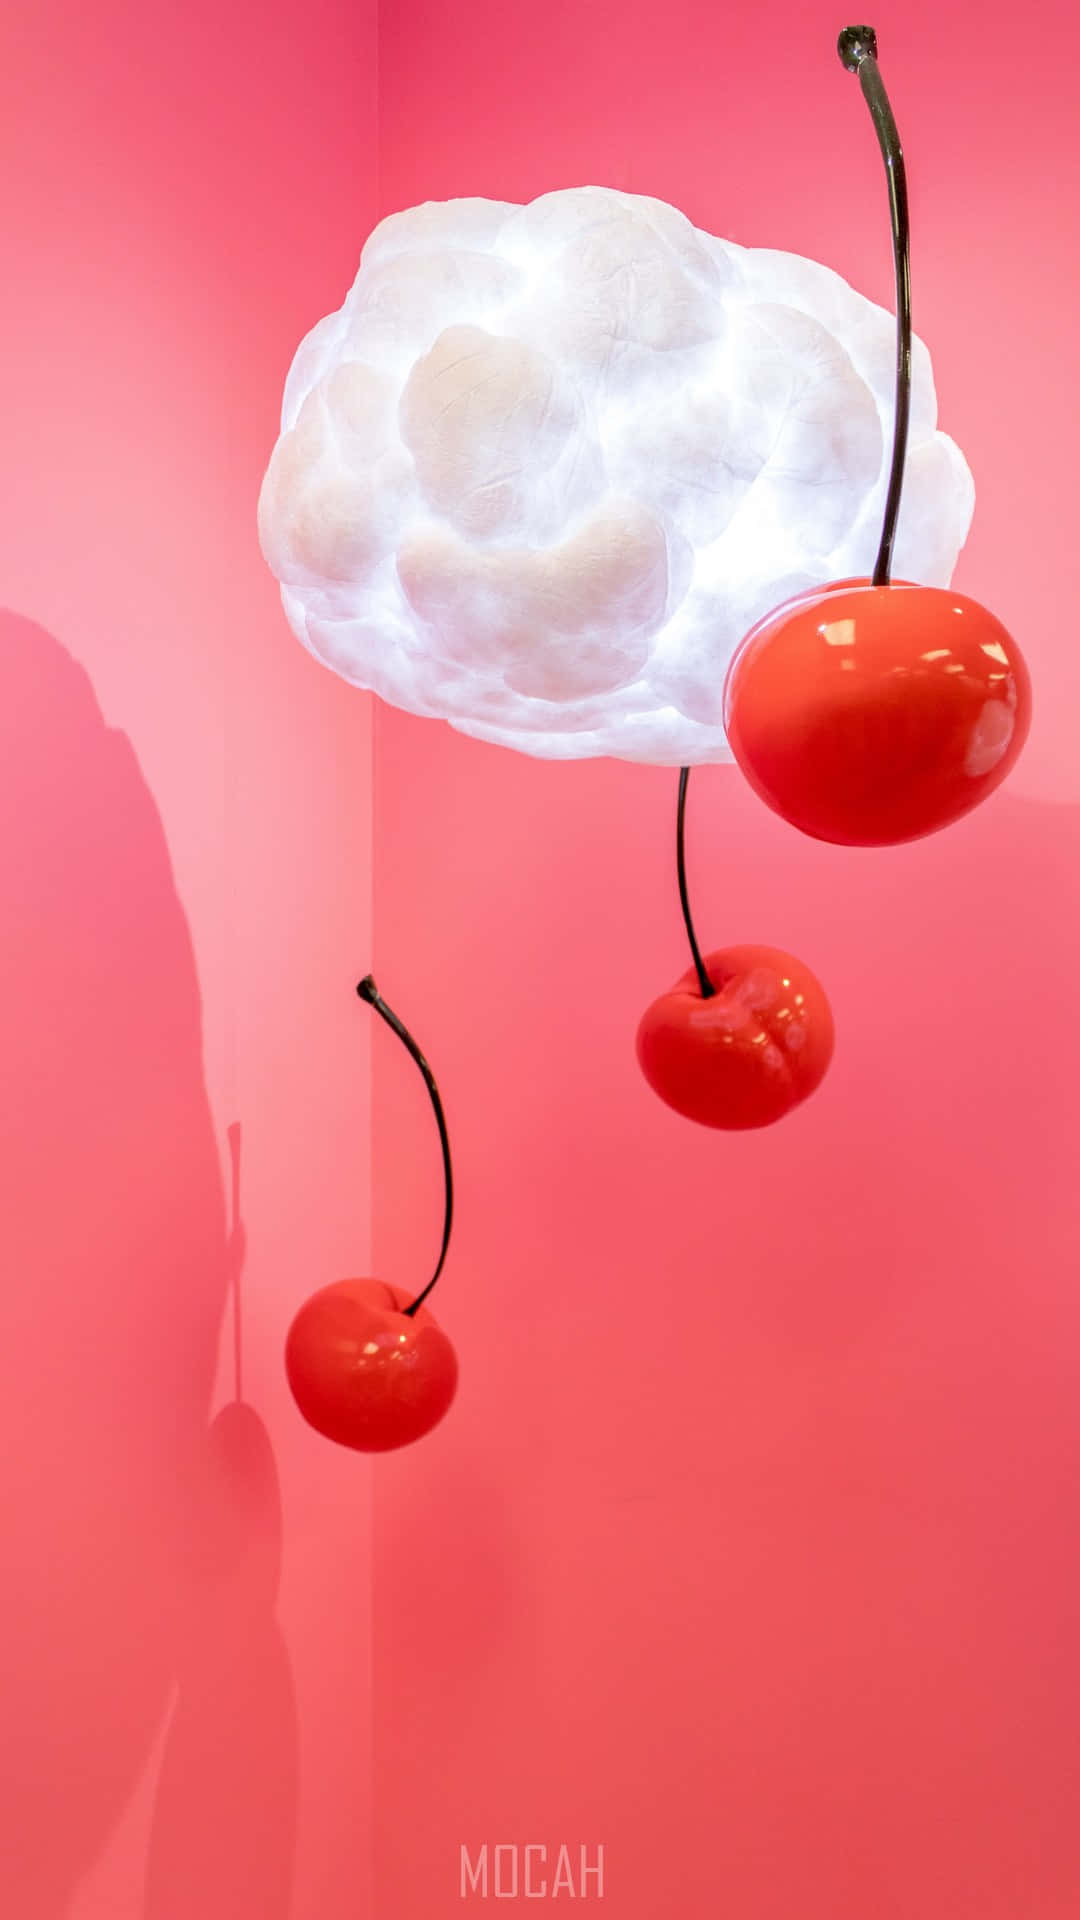 Pink Cotton Candy With Cherries Wallpaper